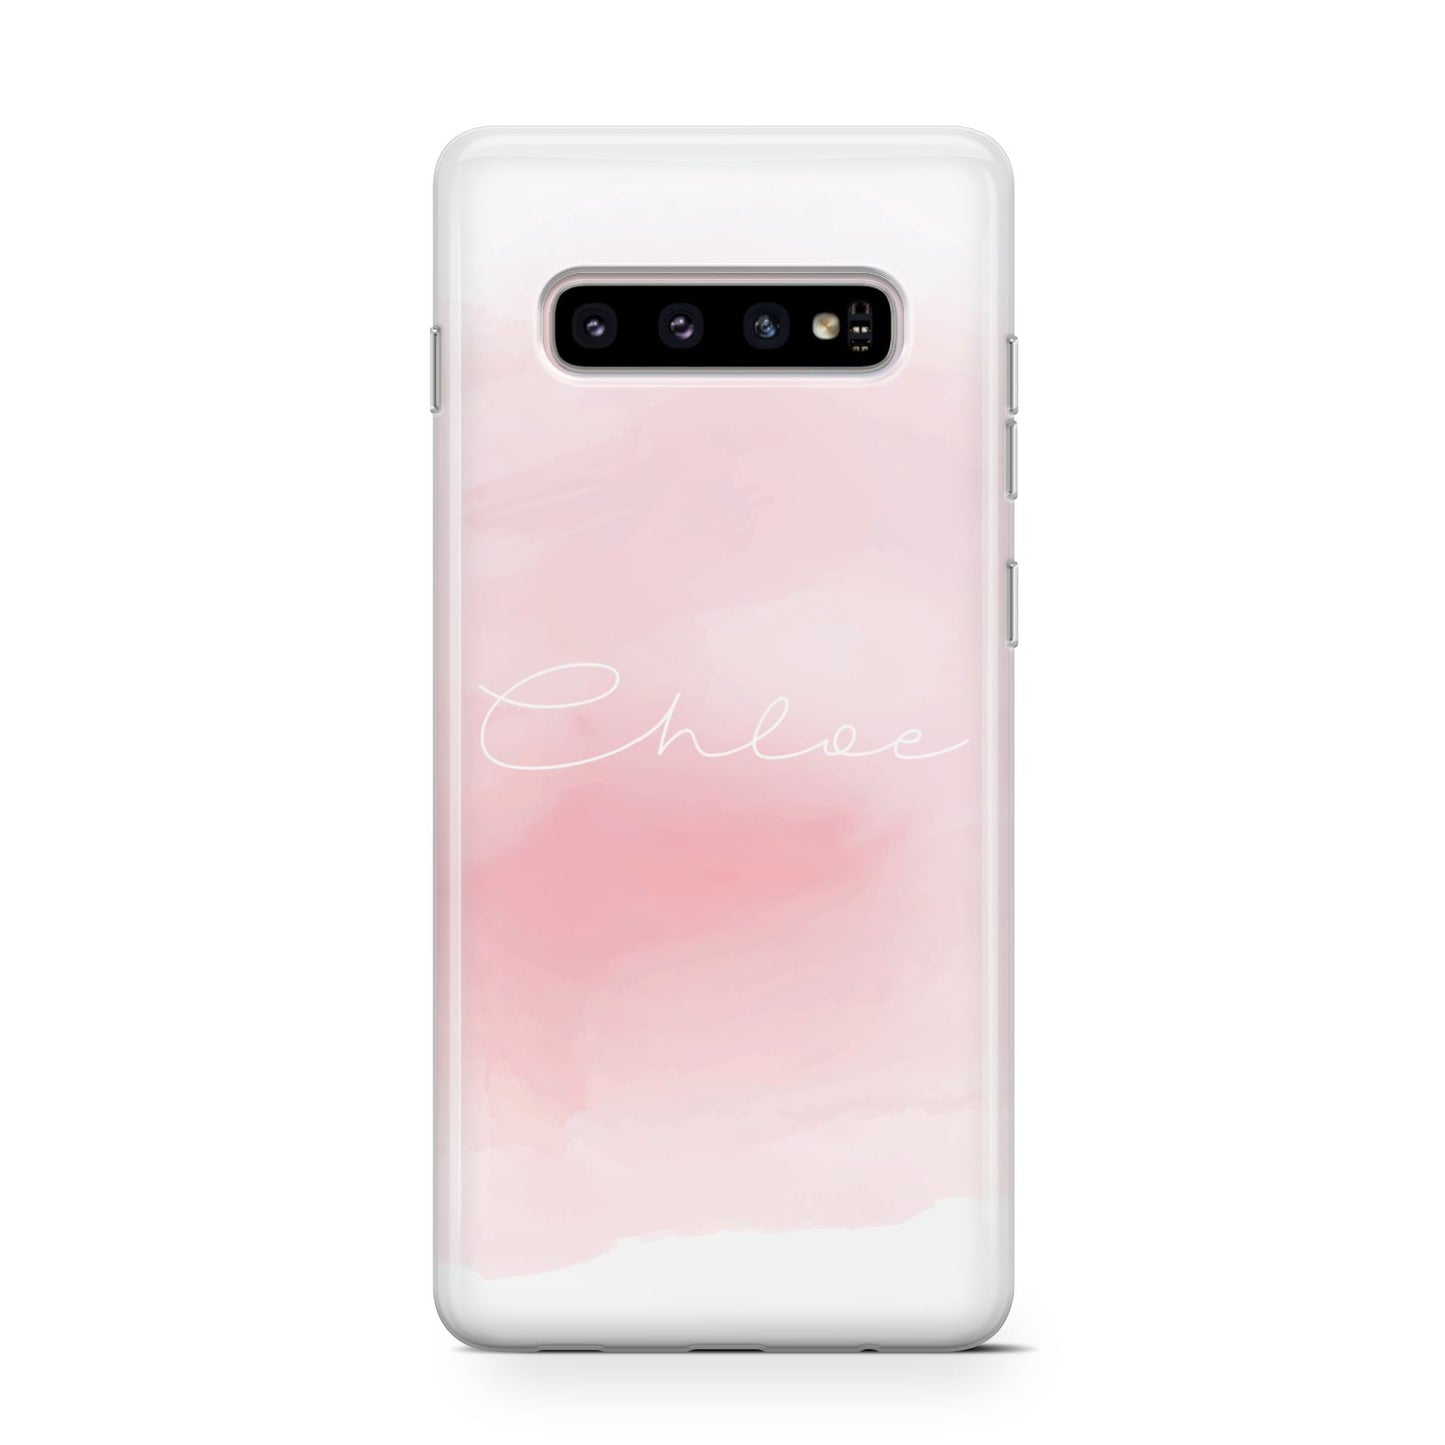 Personalised Handwritten Name Watercolour Samsung Galaxy S10 Case